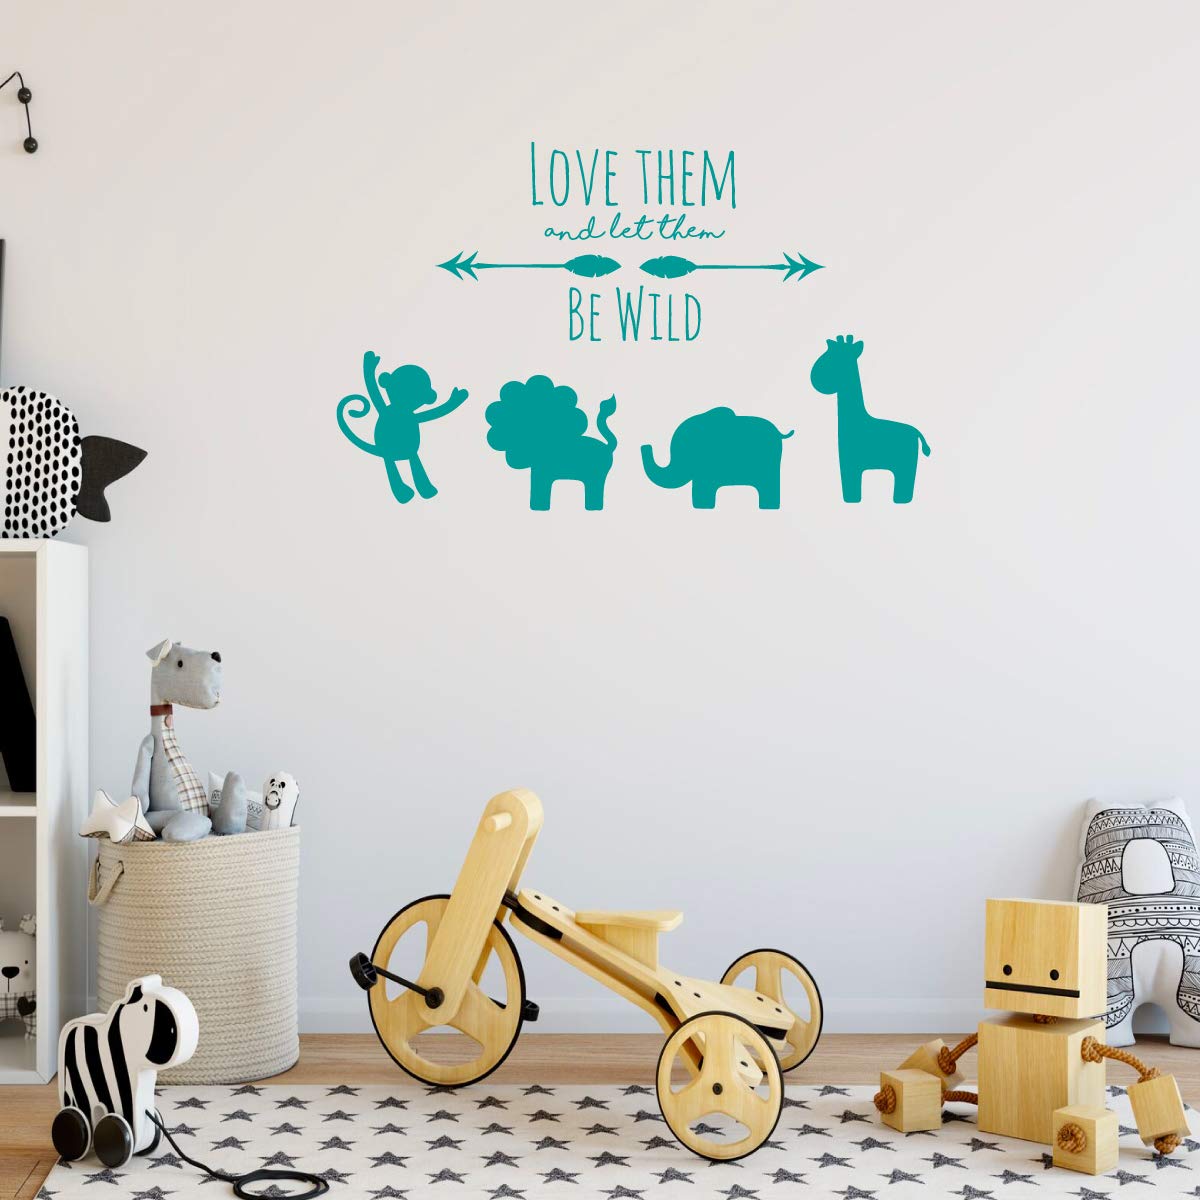 Animal Themed Wall Decal - Love Them Let Them Be Wild - Vinyl Decor for Baby's Nursery, Bedroom Kids Room, Playroom or Classroom – Silhouette of Lion, Hippo, Elephant and Giraffe